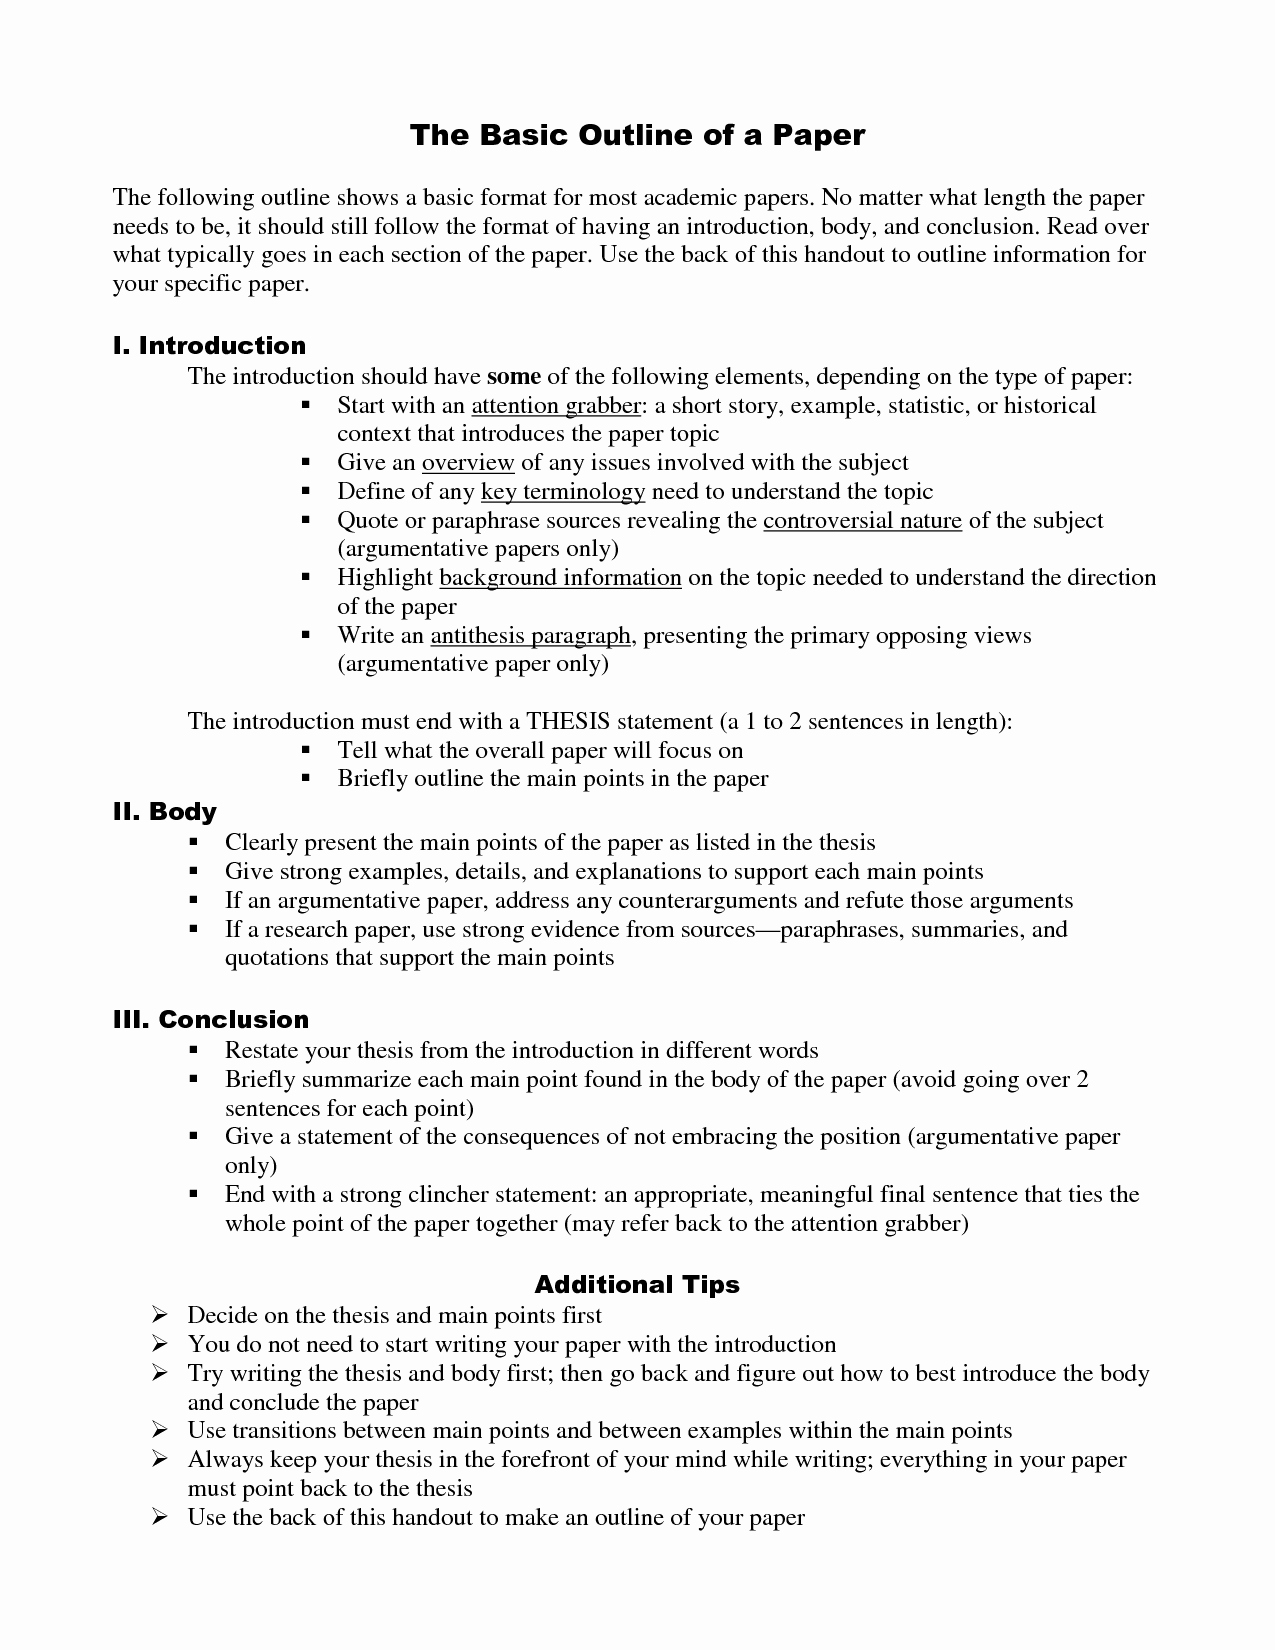 Sample Outlines for Research Papers Luxury High Paper Research School Write Research Paper and